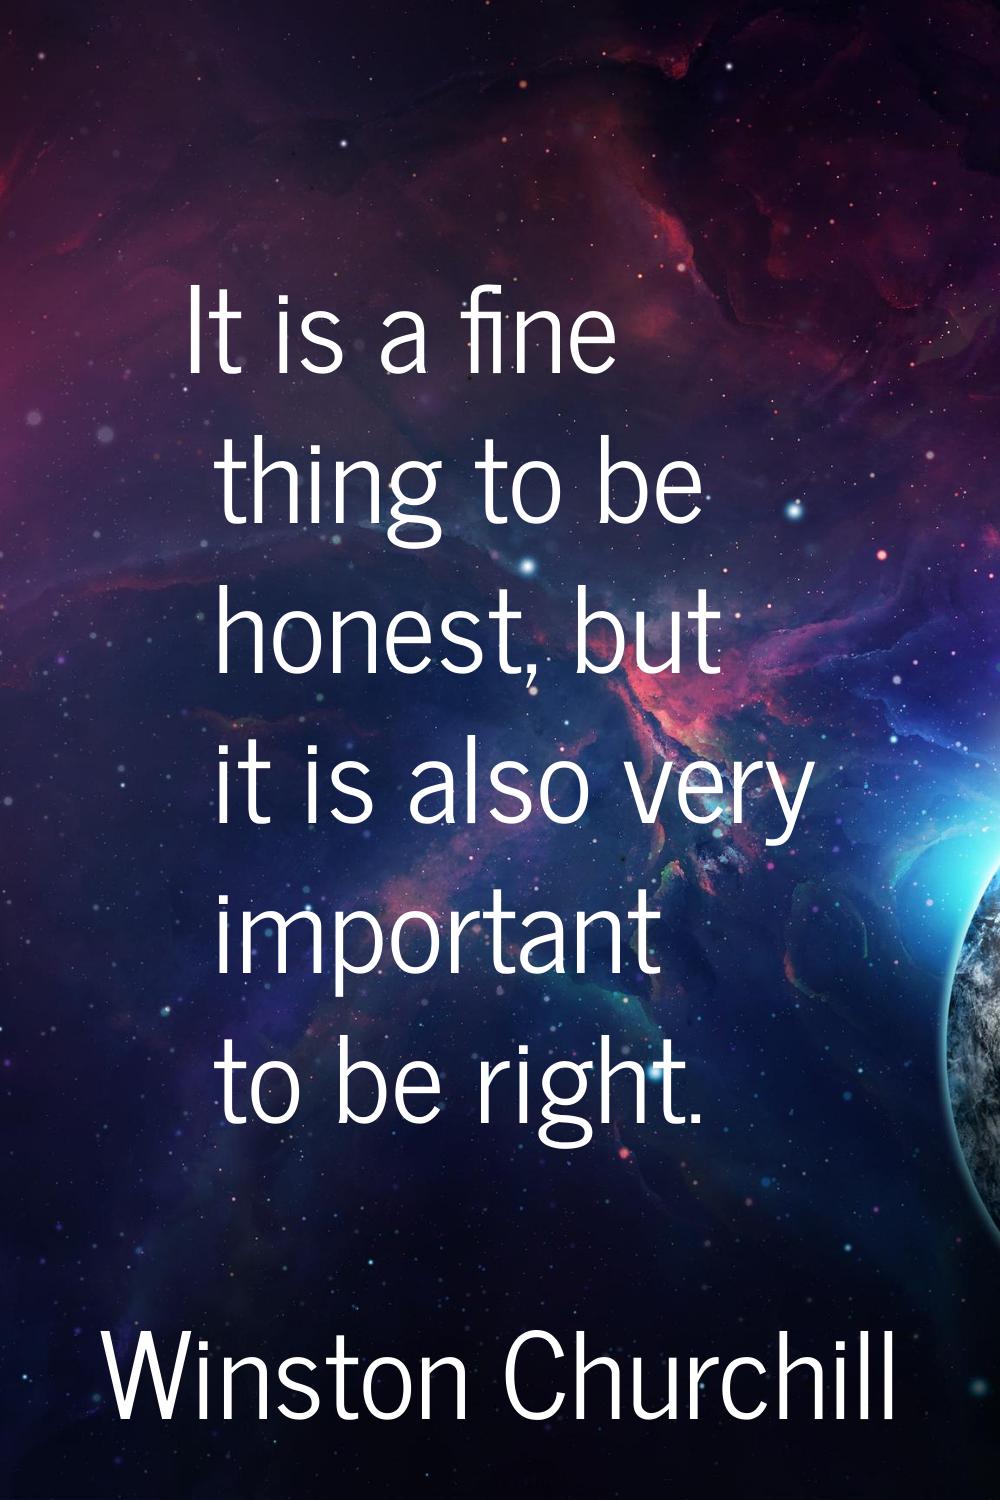 It is a fine thing to be honest, but it is also very important to be right.